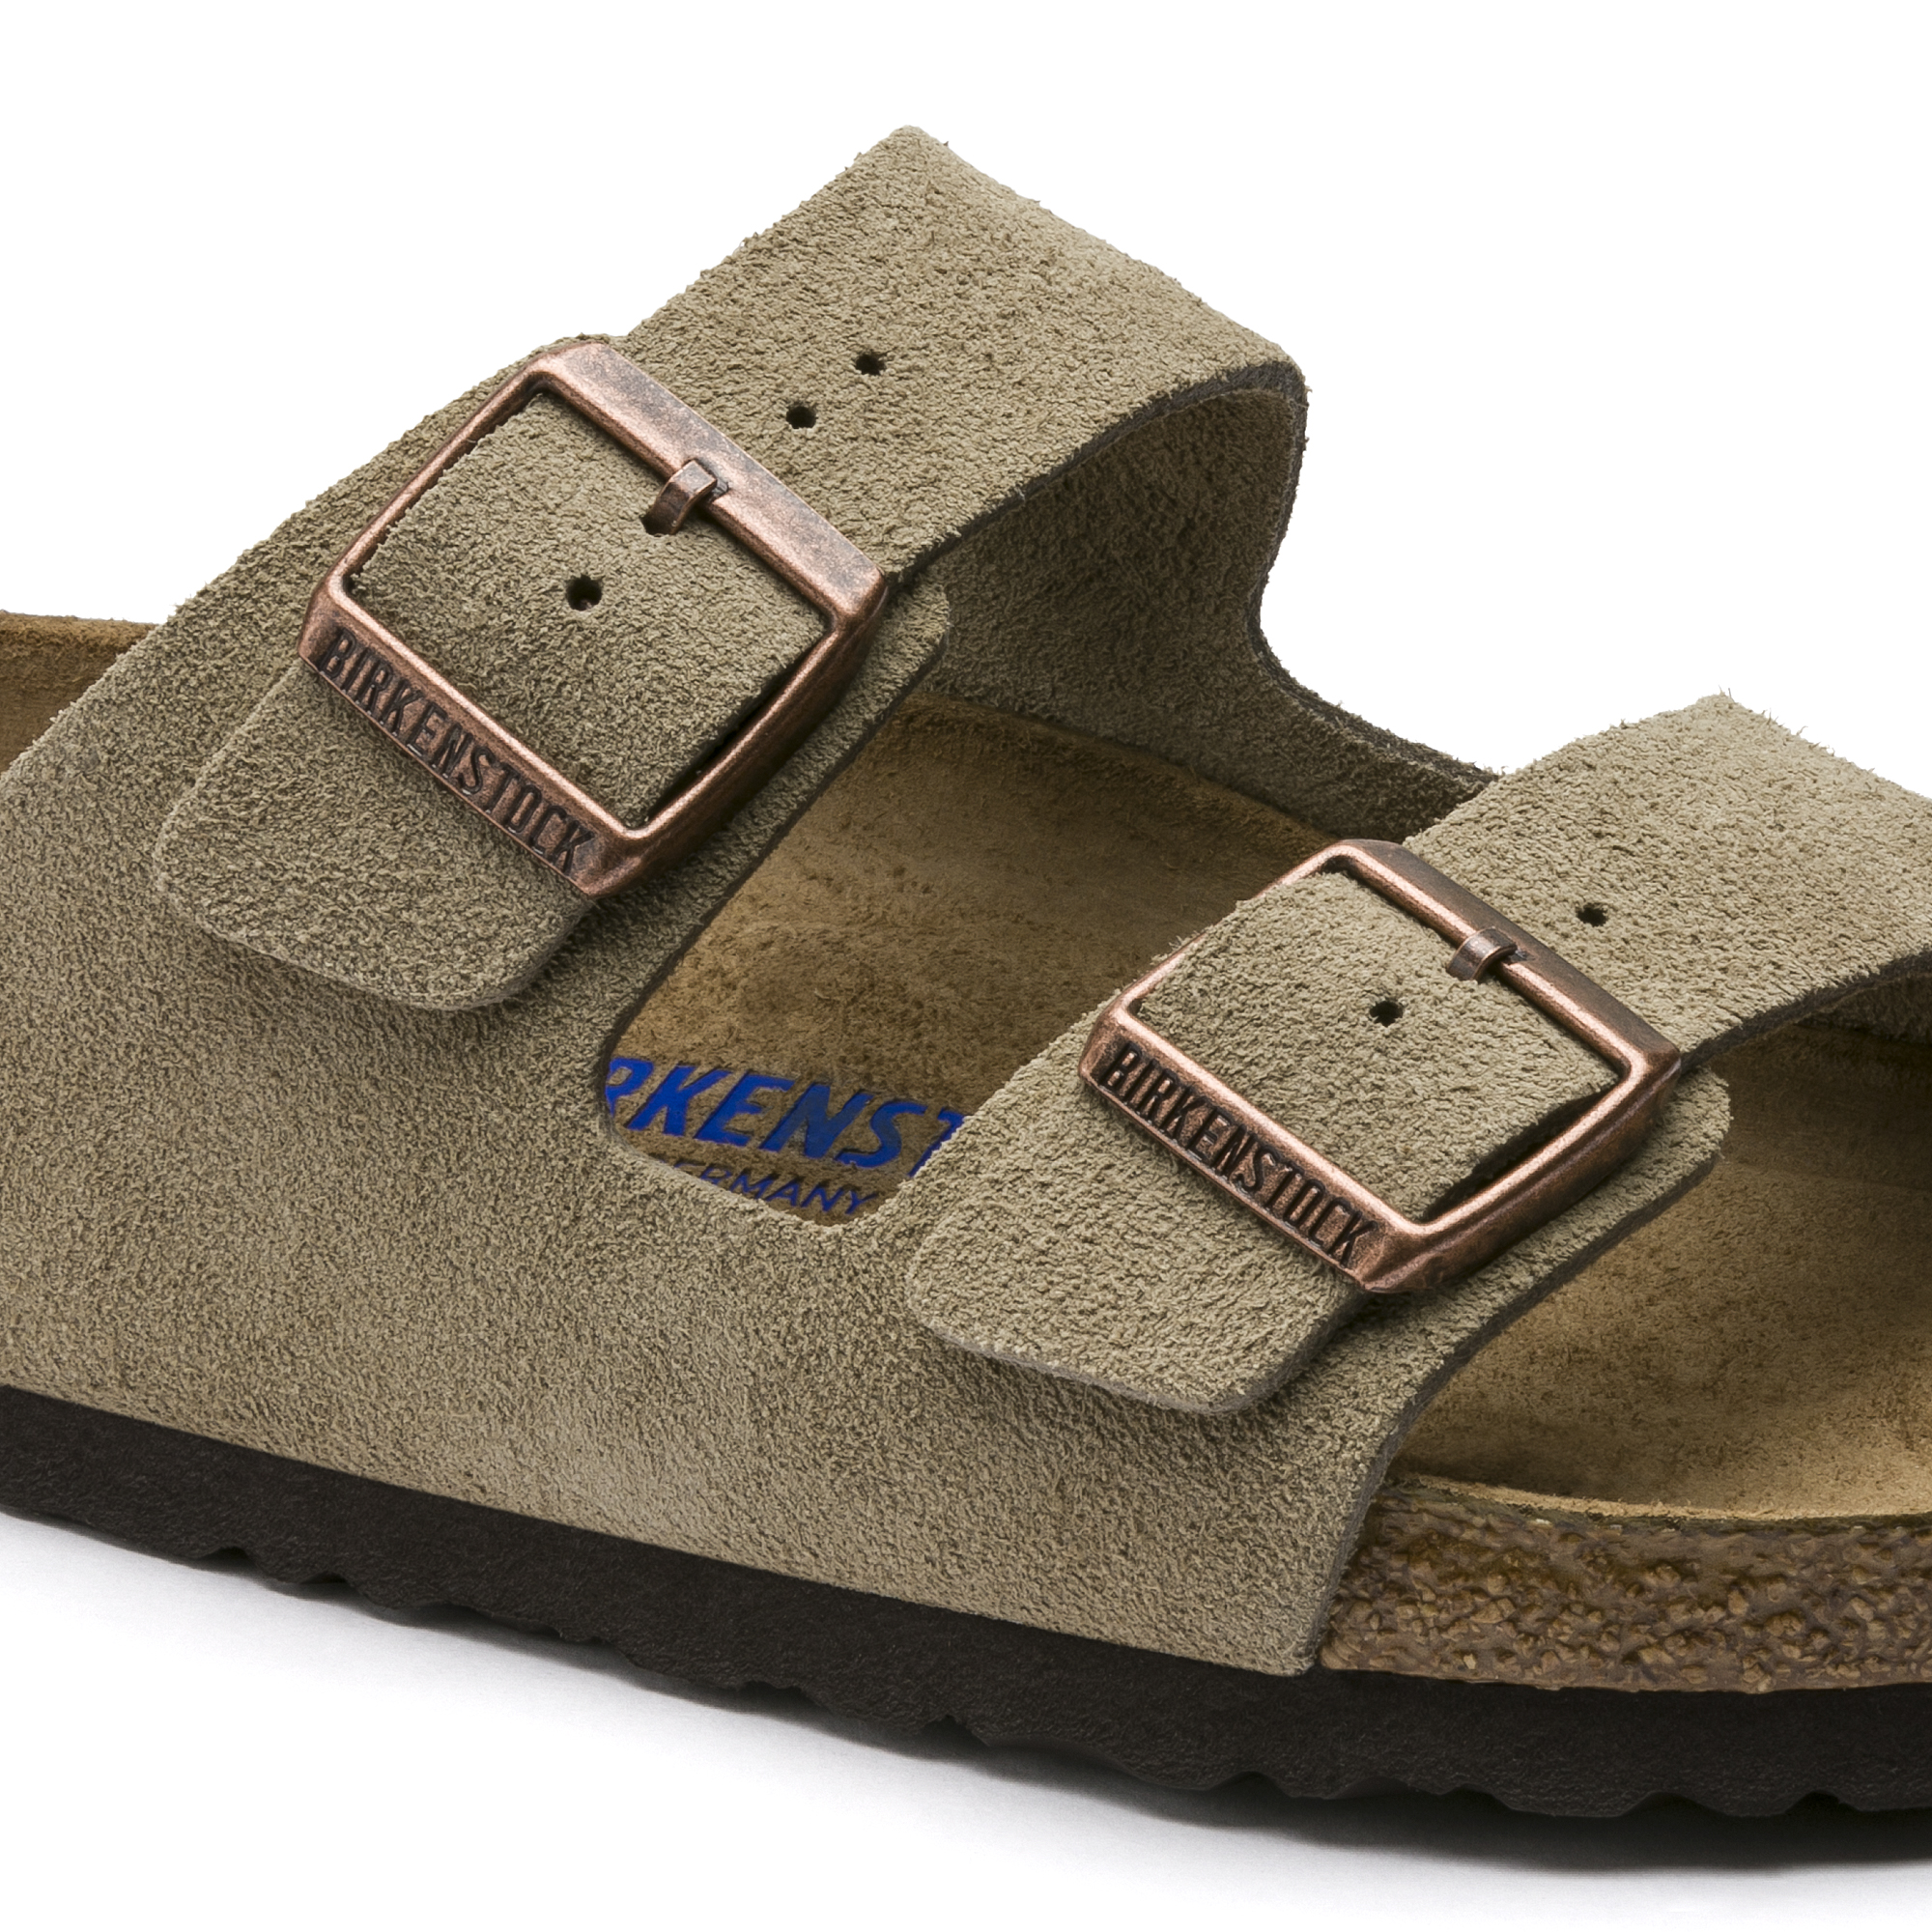 Birkenstock Arizona Soft Footbed Suede Leather in Taupe